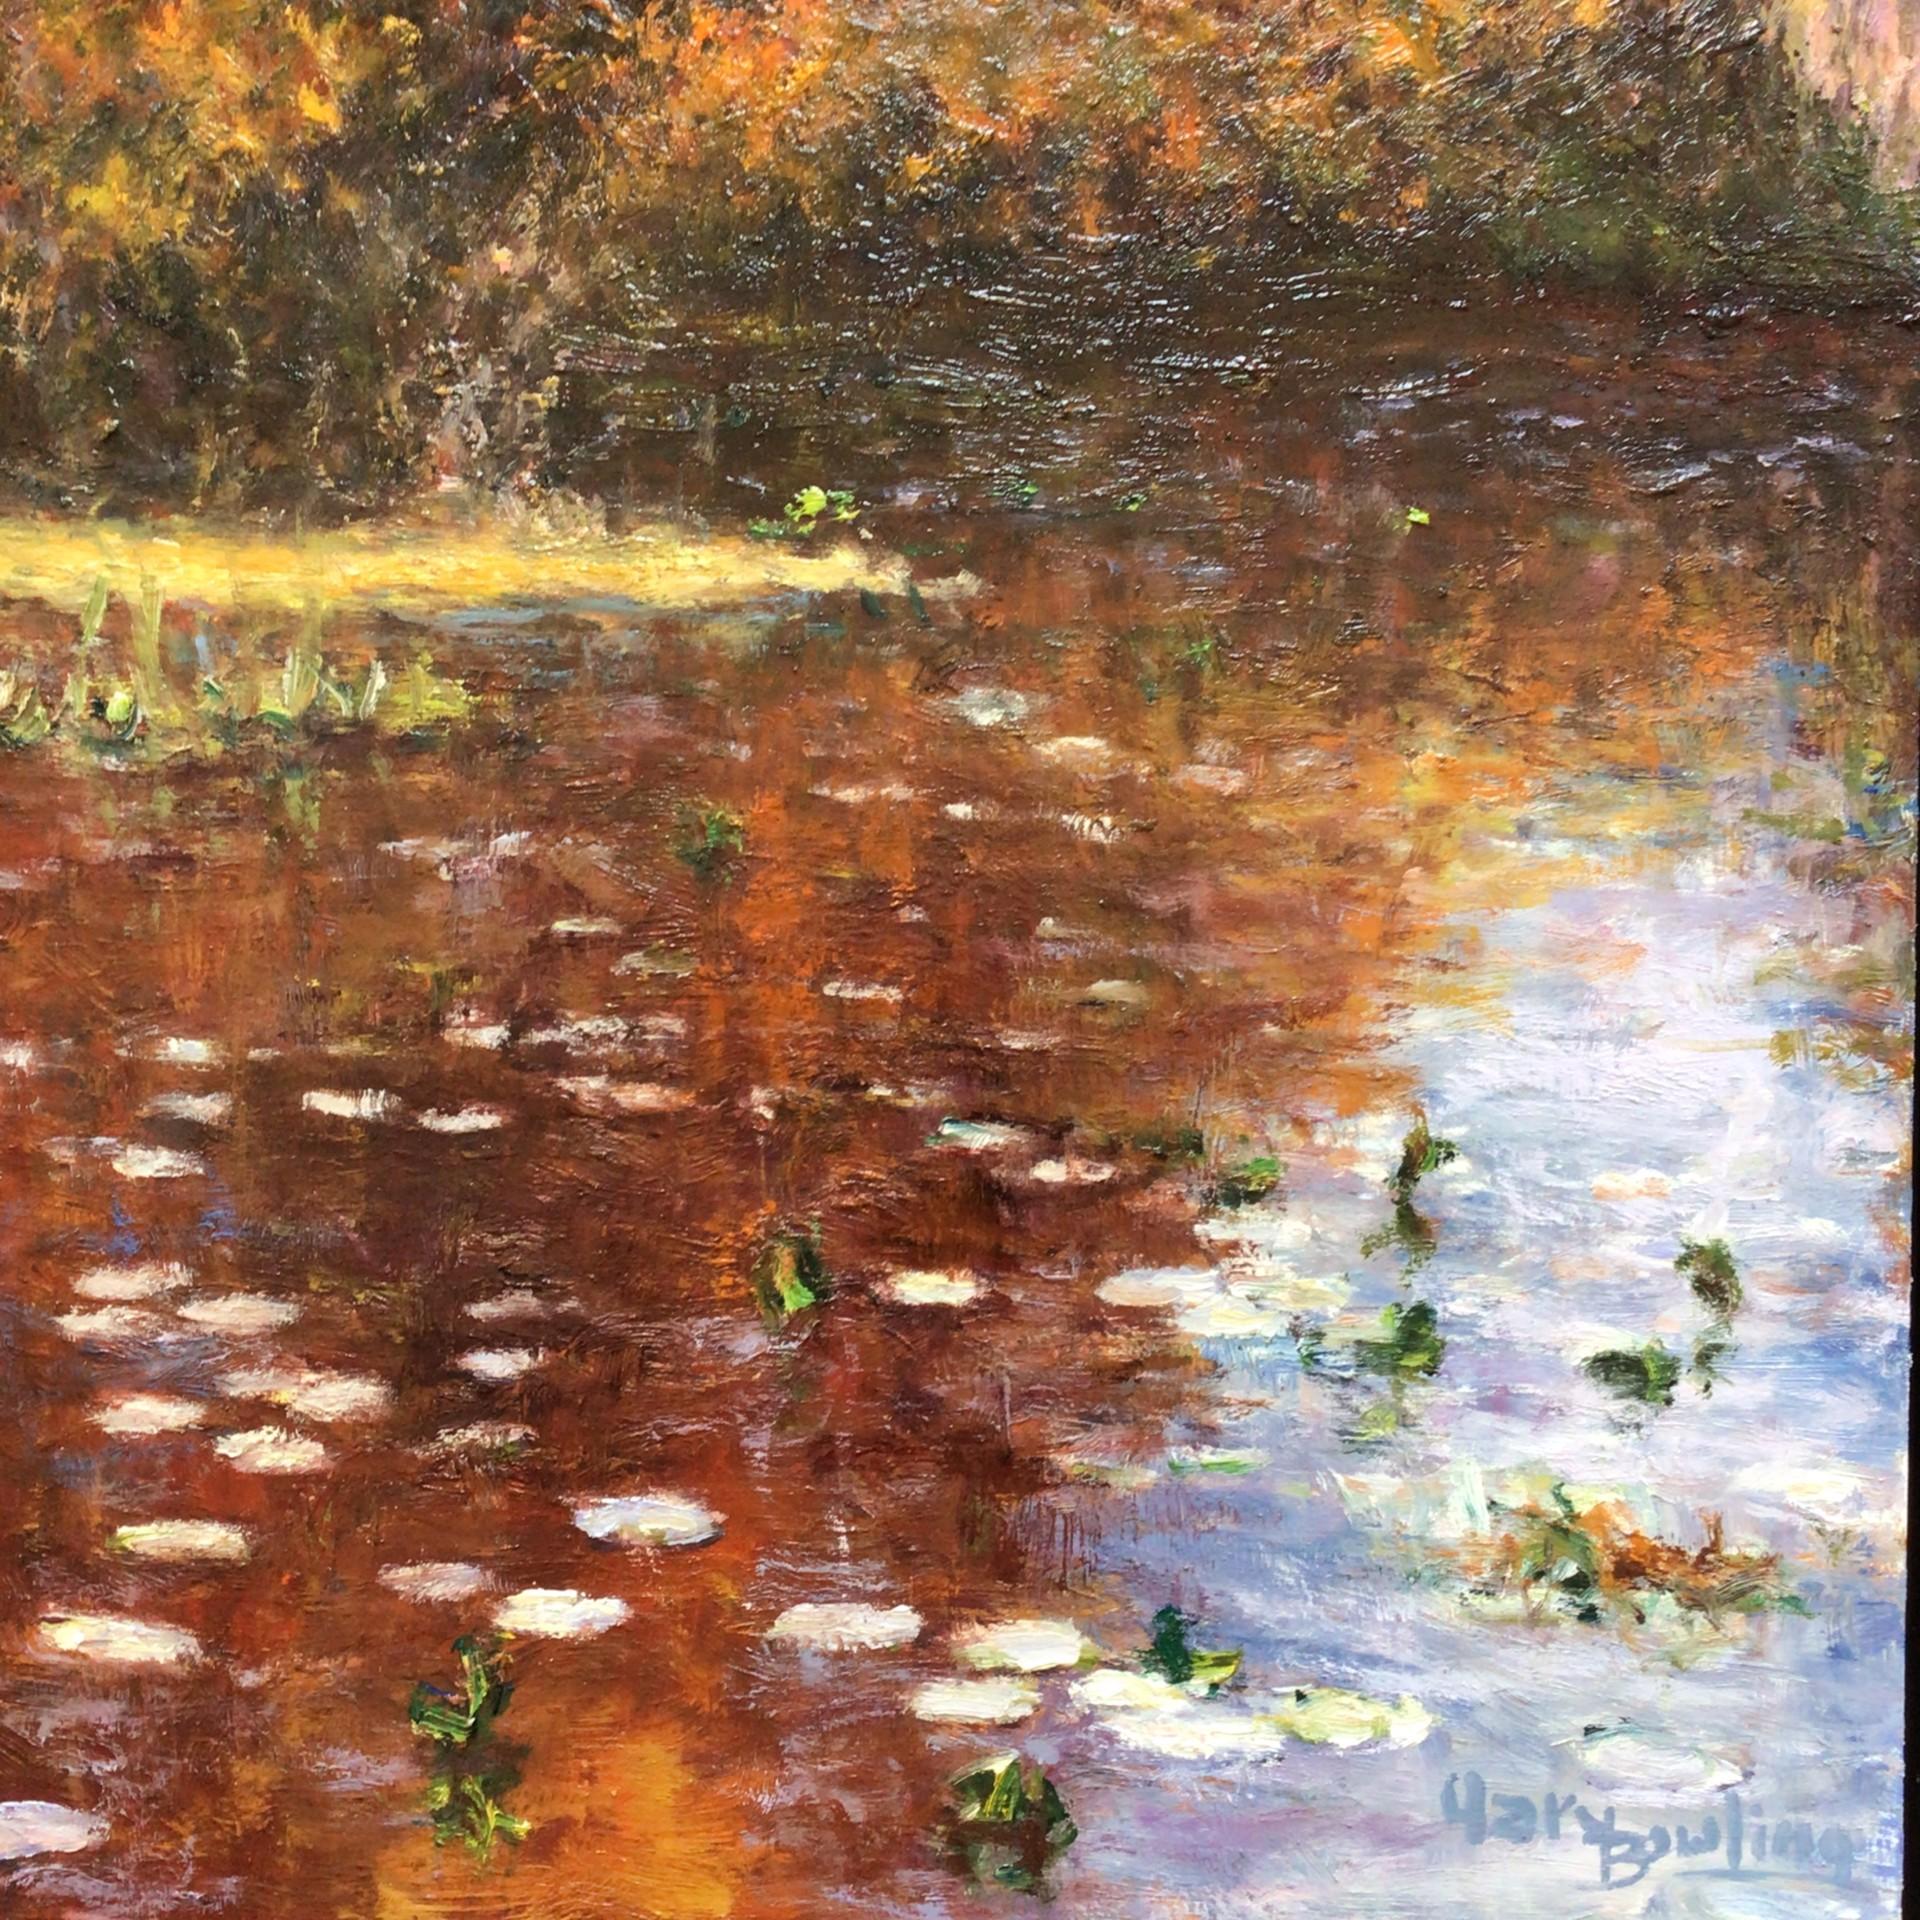 Arcadian Fall, 2022 - Painting by Gary Bowling